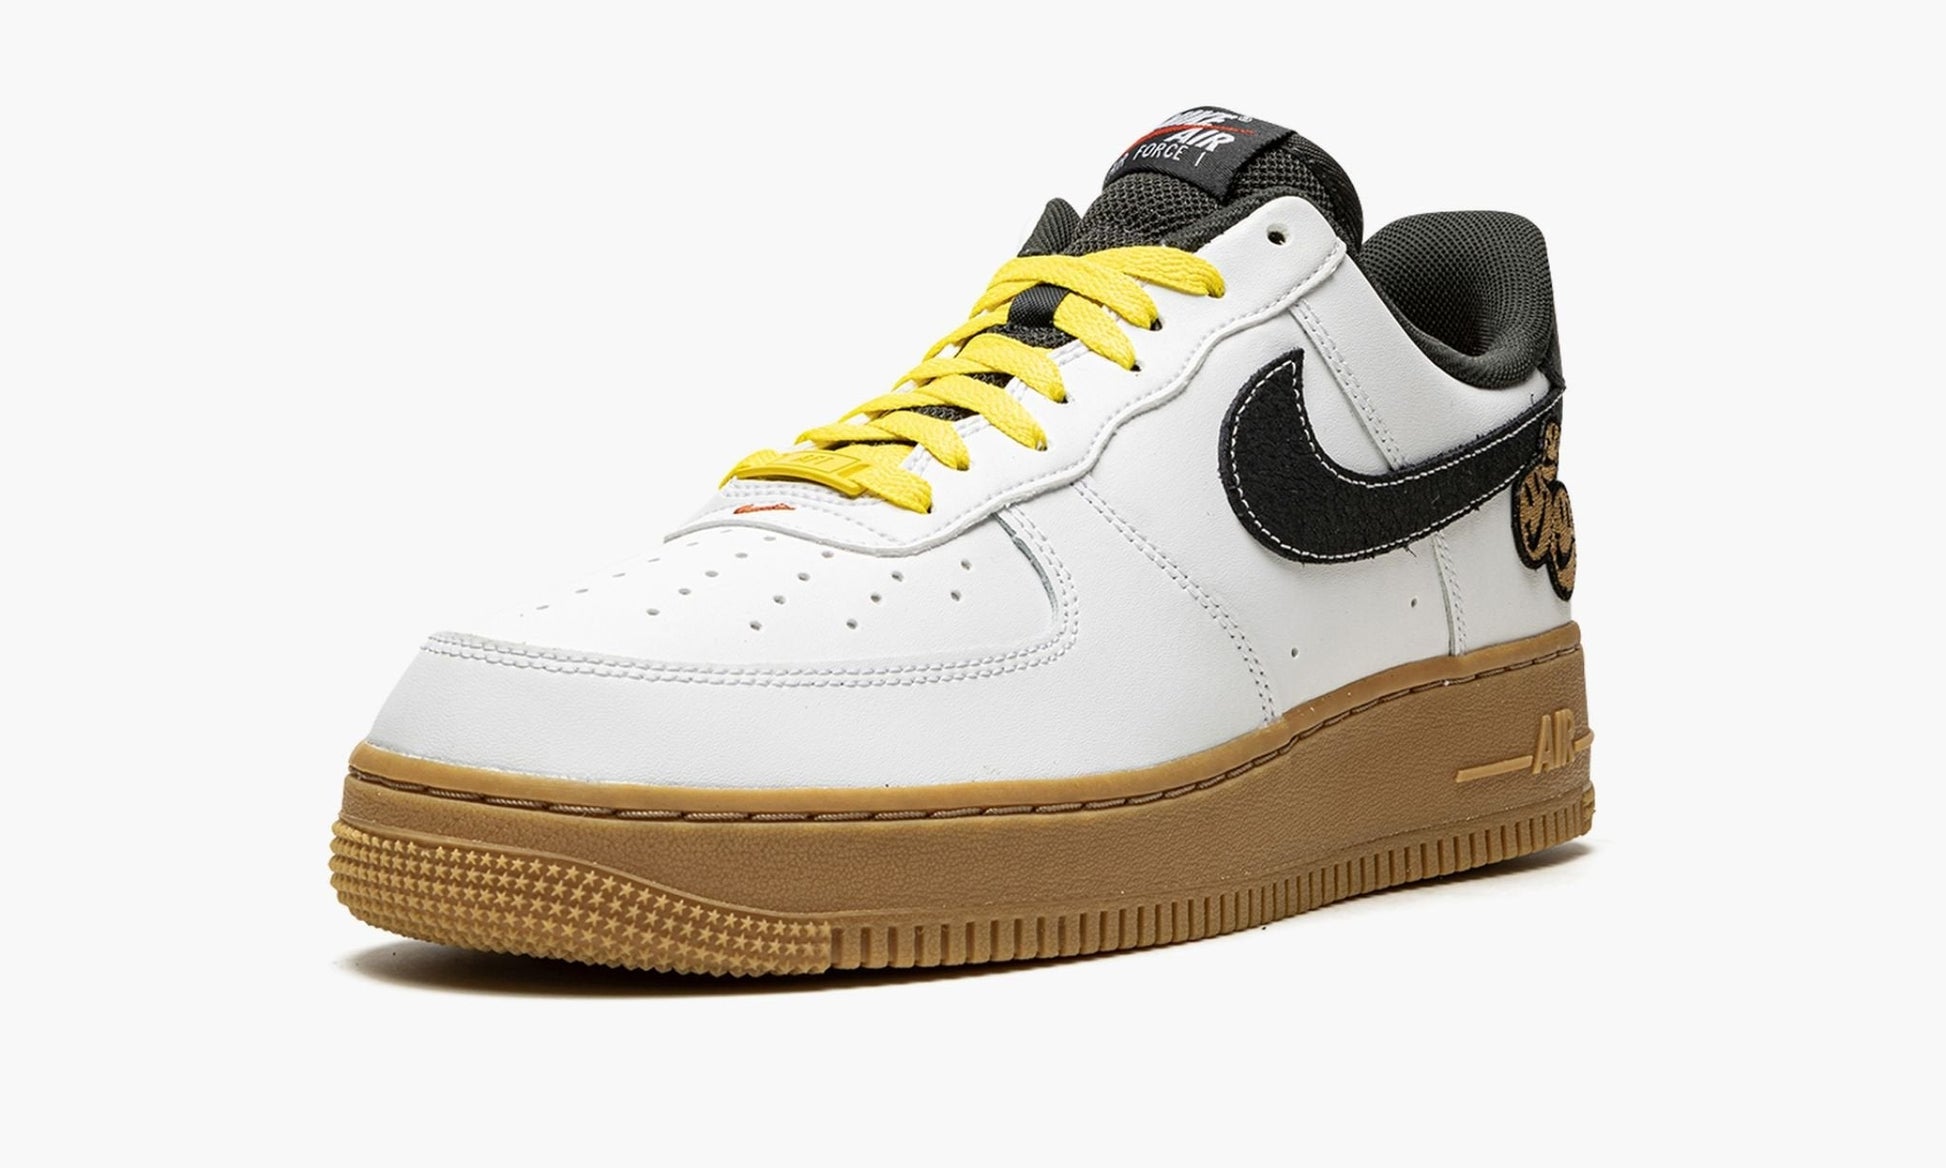 Nike Air Force 1 Low '07 LV8 "Go The Extra The Smile"